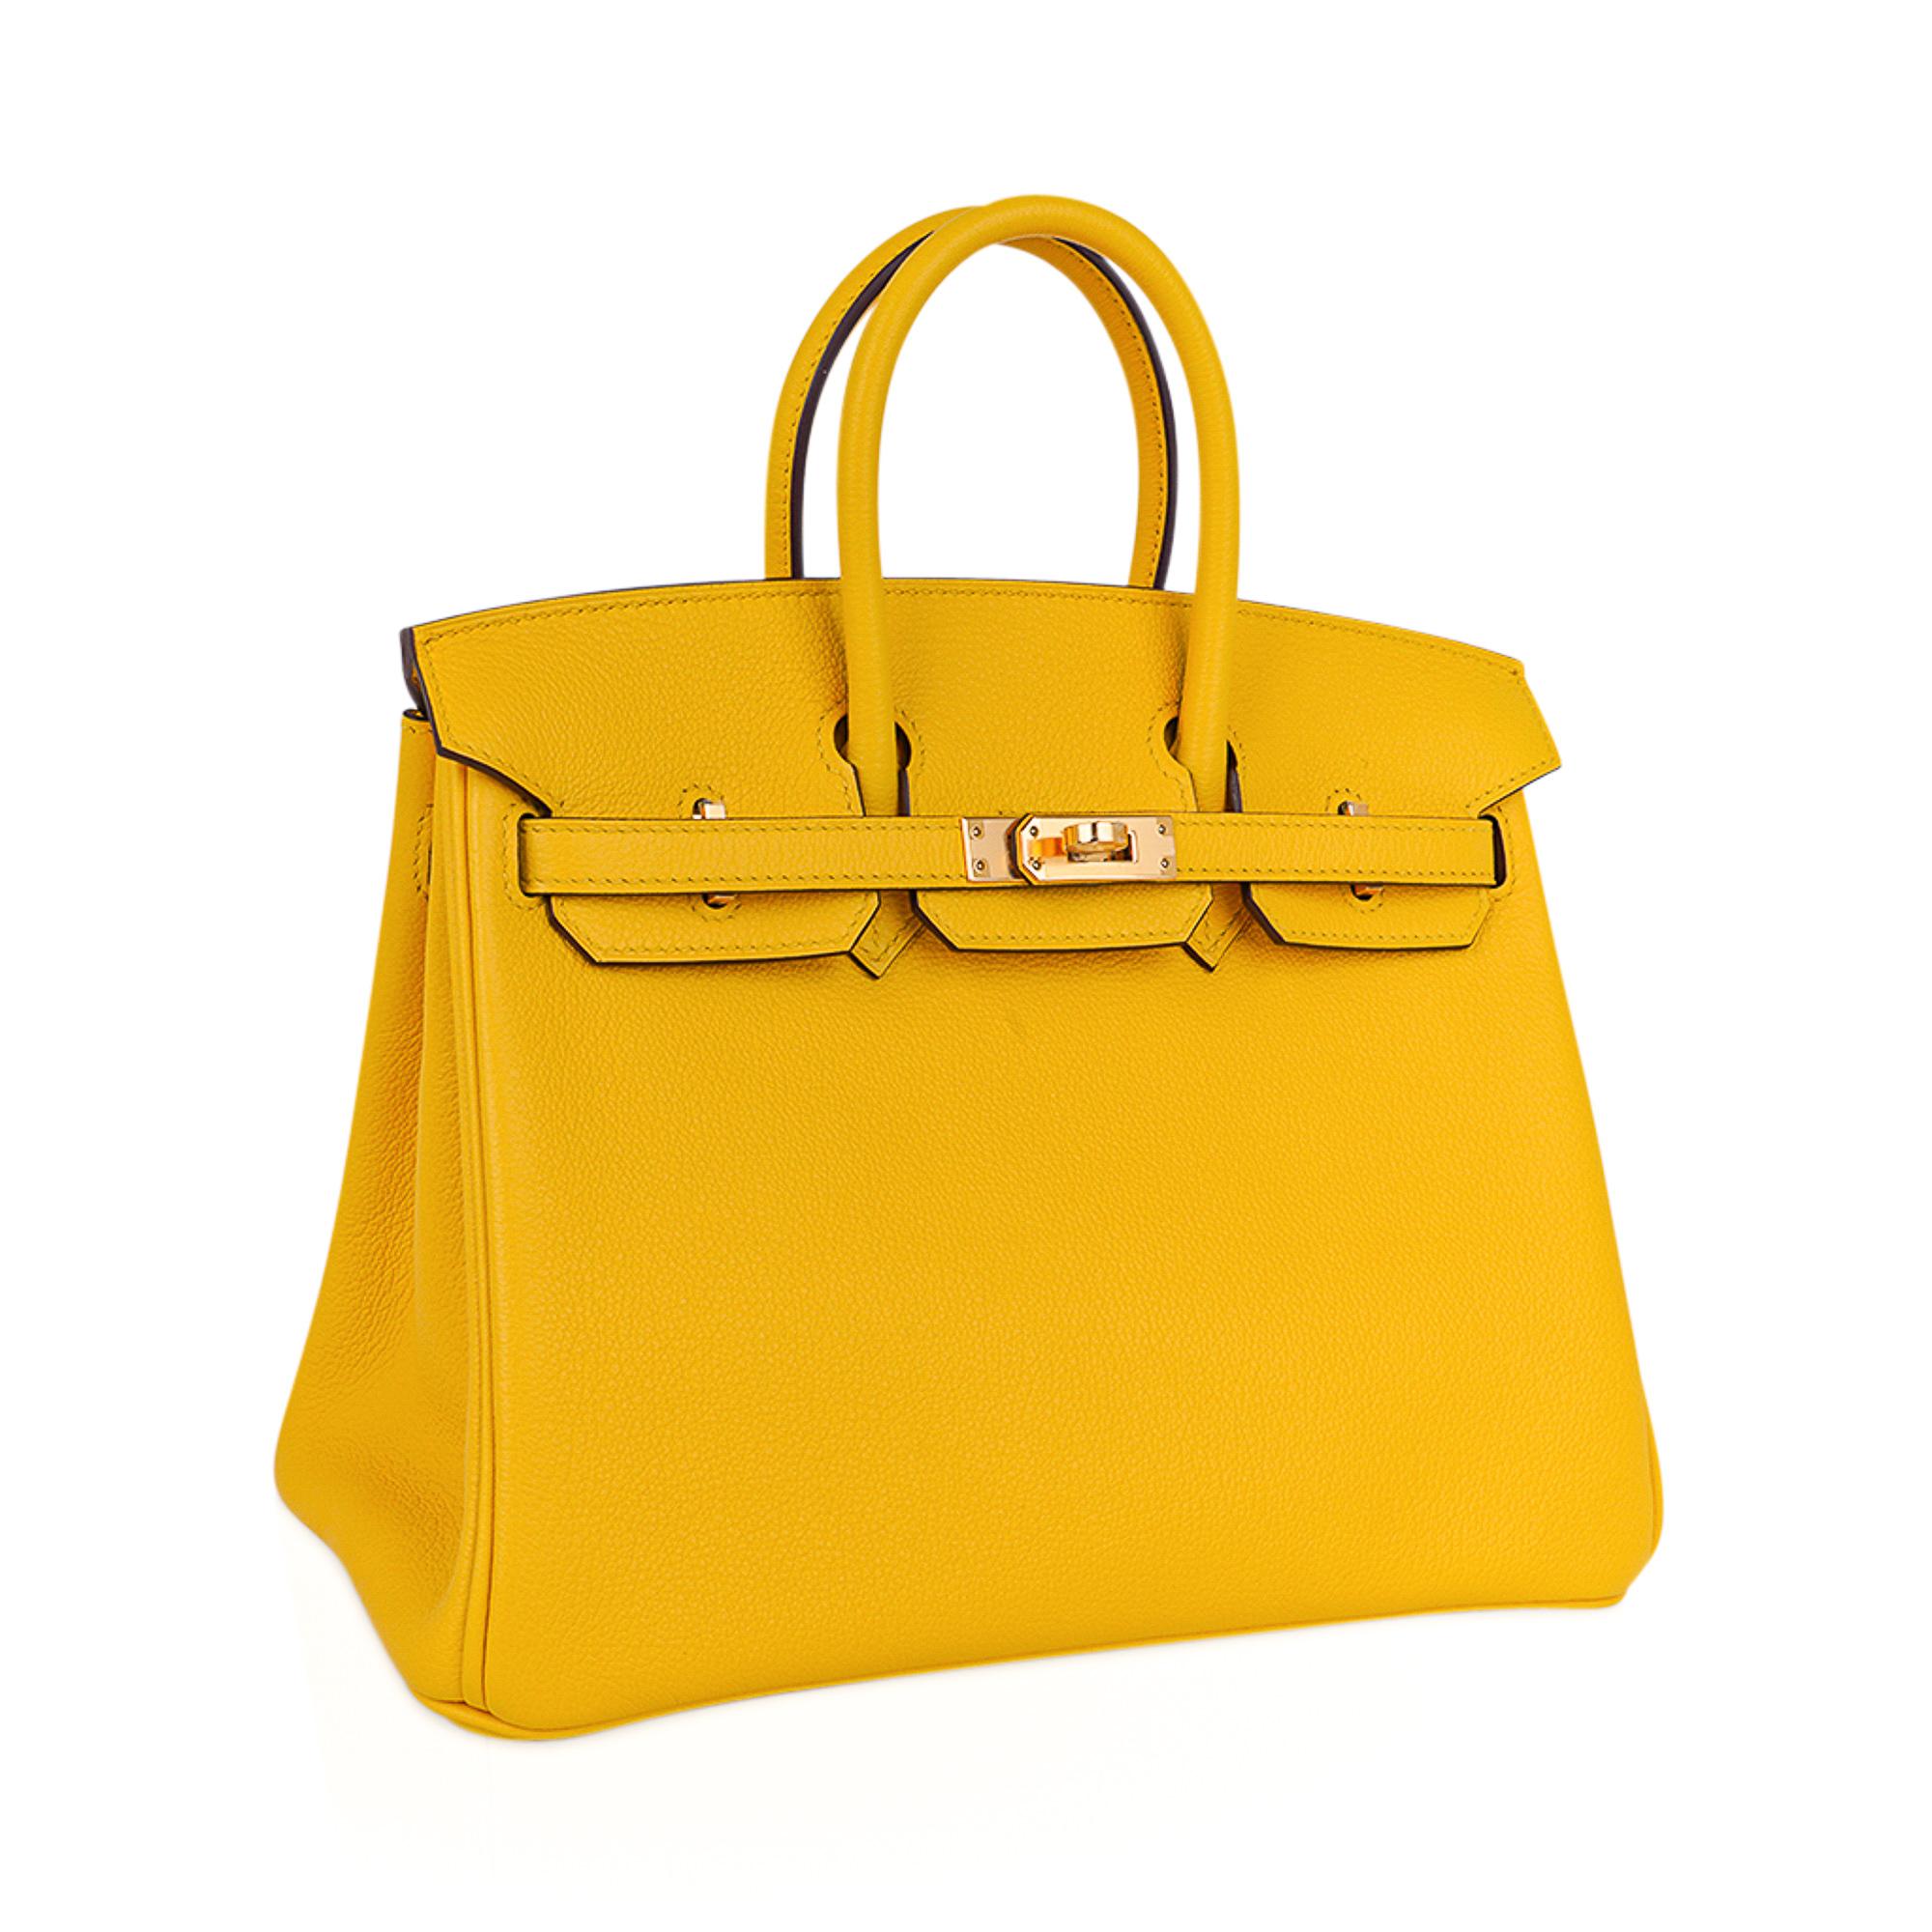 Mightychic offers an Hermes Birkin 25 bag featured in Jaune de Naples.
This beautiful warm yellow is a beautiful year round color!
Lush with Gold hardware.
Bull leather, Taurillion Novillo has a far finer grain than clemence or togo, and is lighter